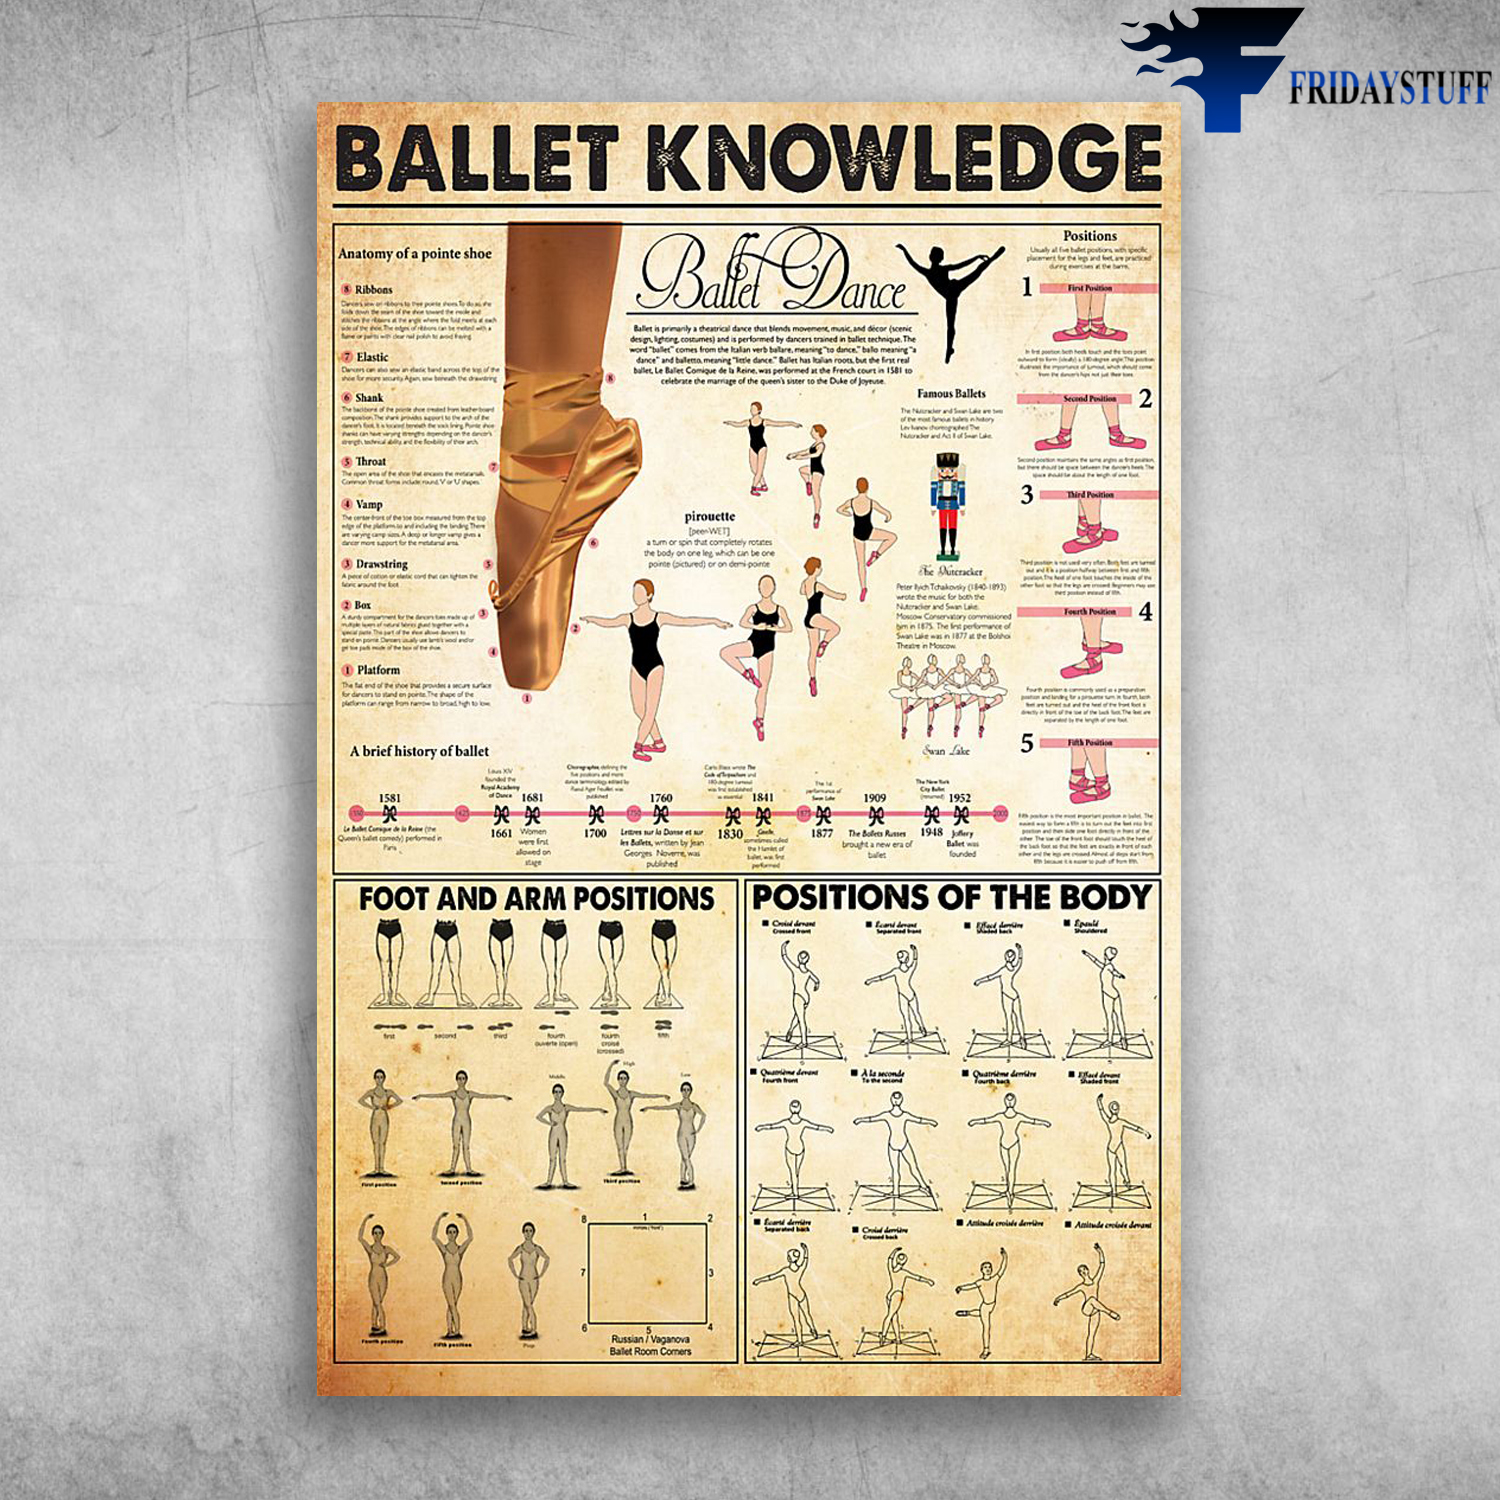 The anatomy of ballet shoes